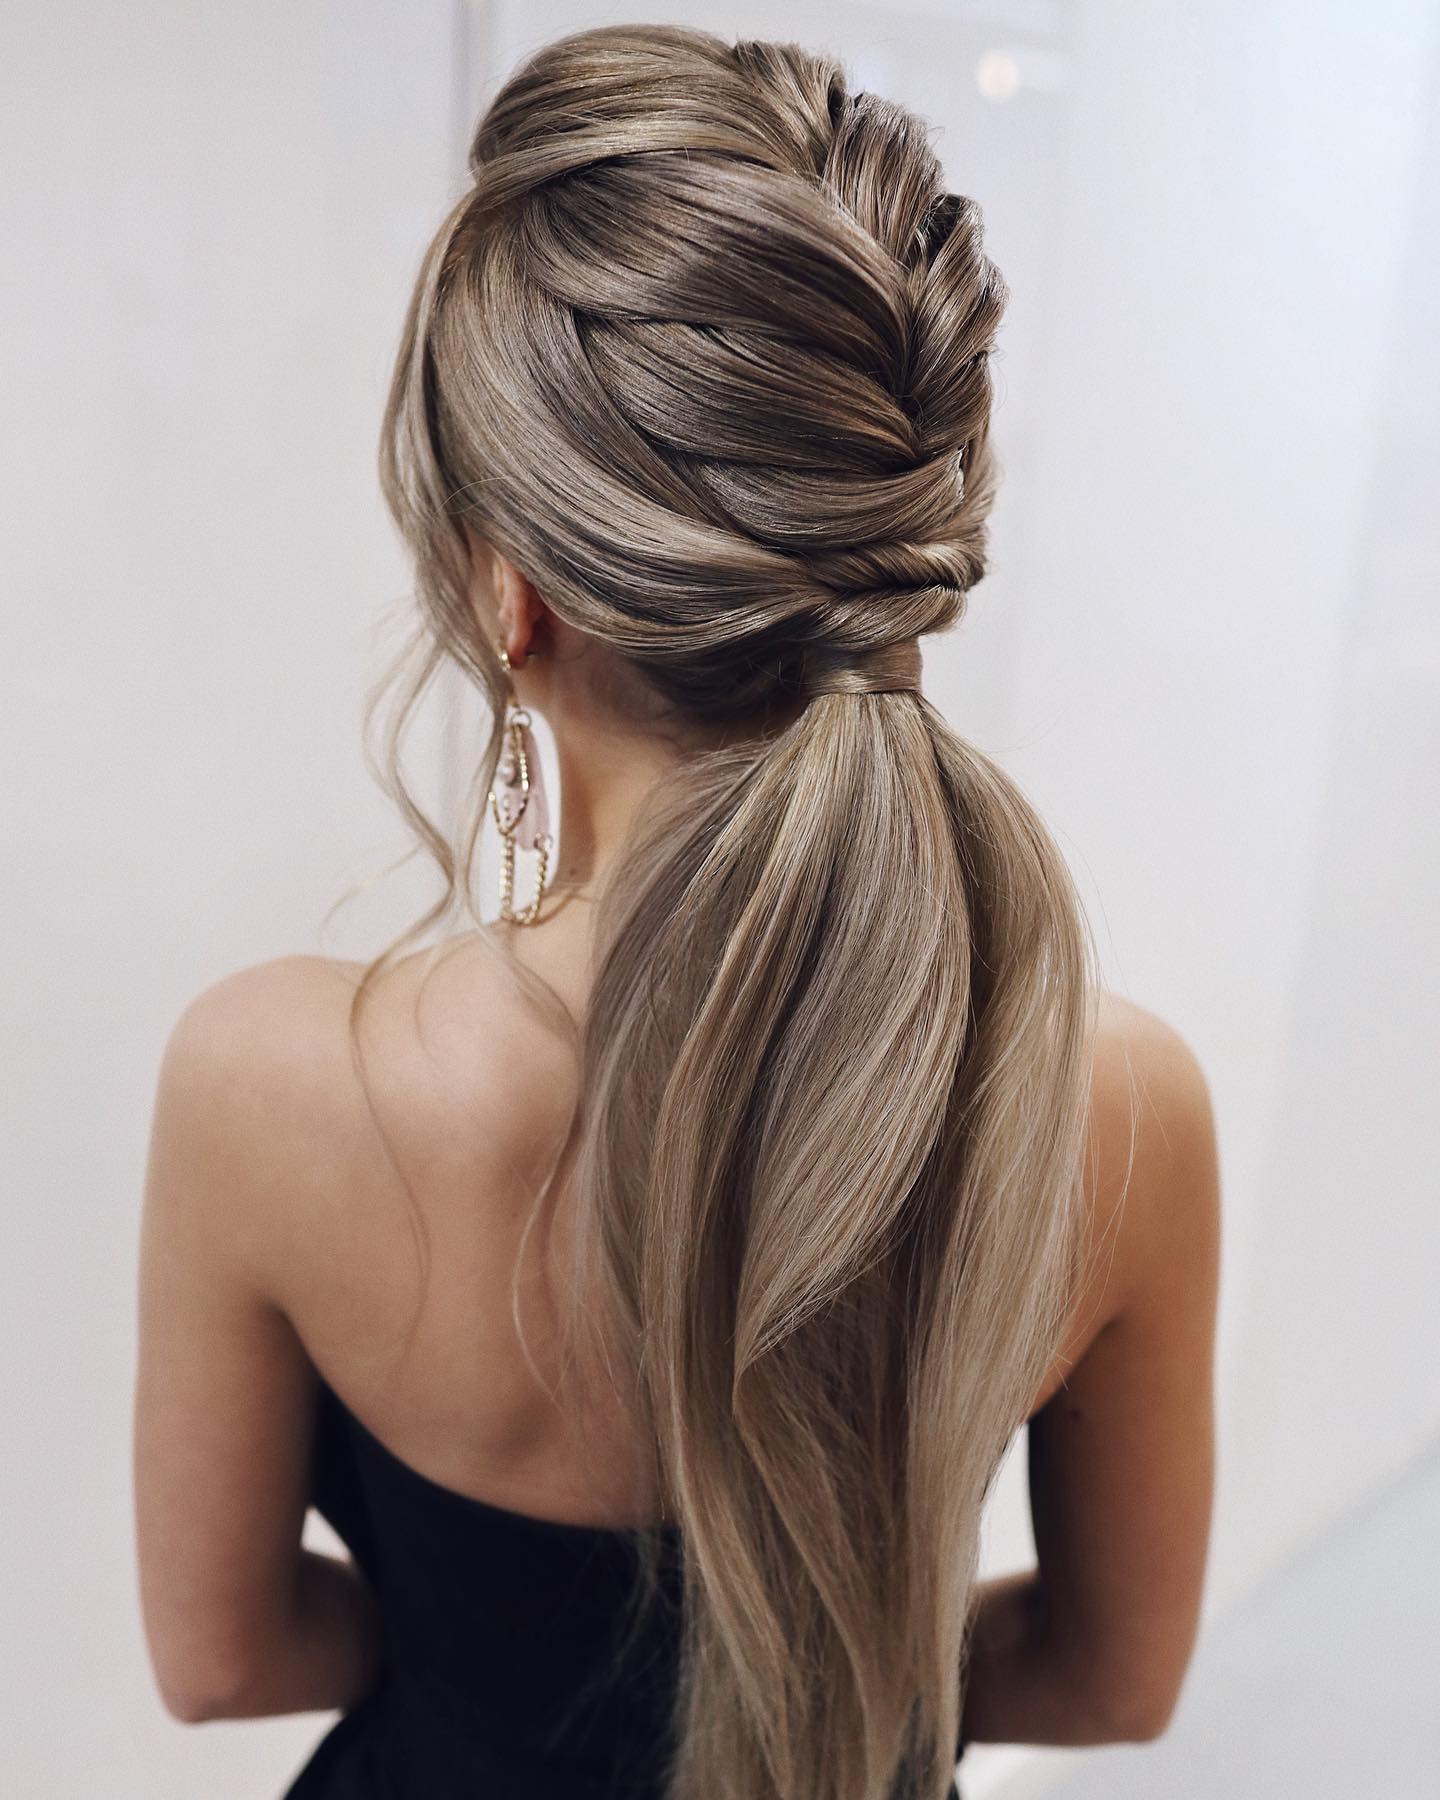 braid into low ponytail prom hairstyle